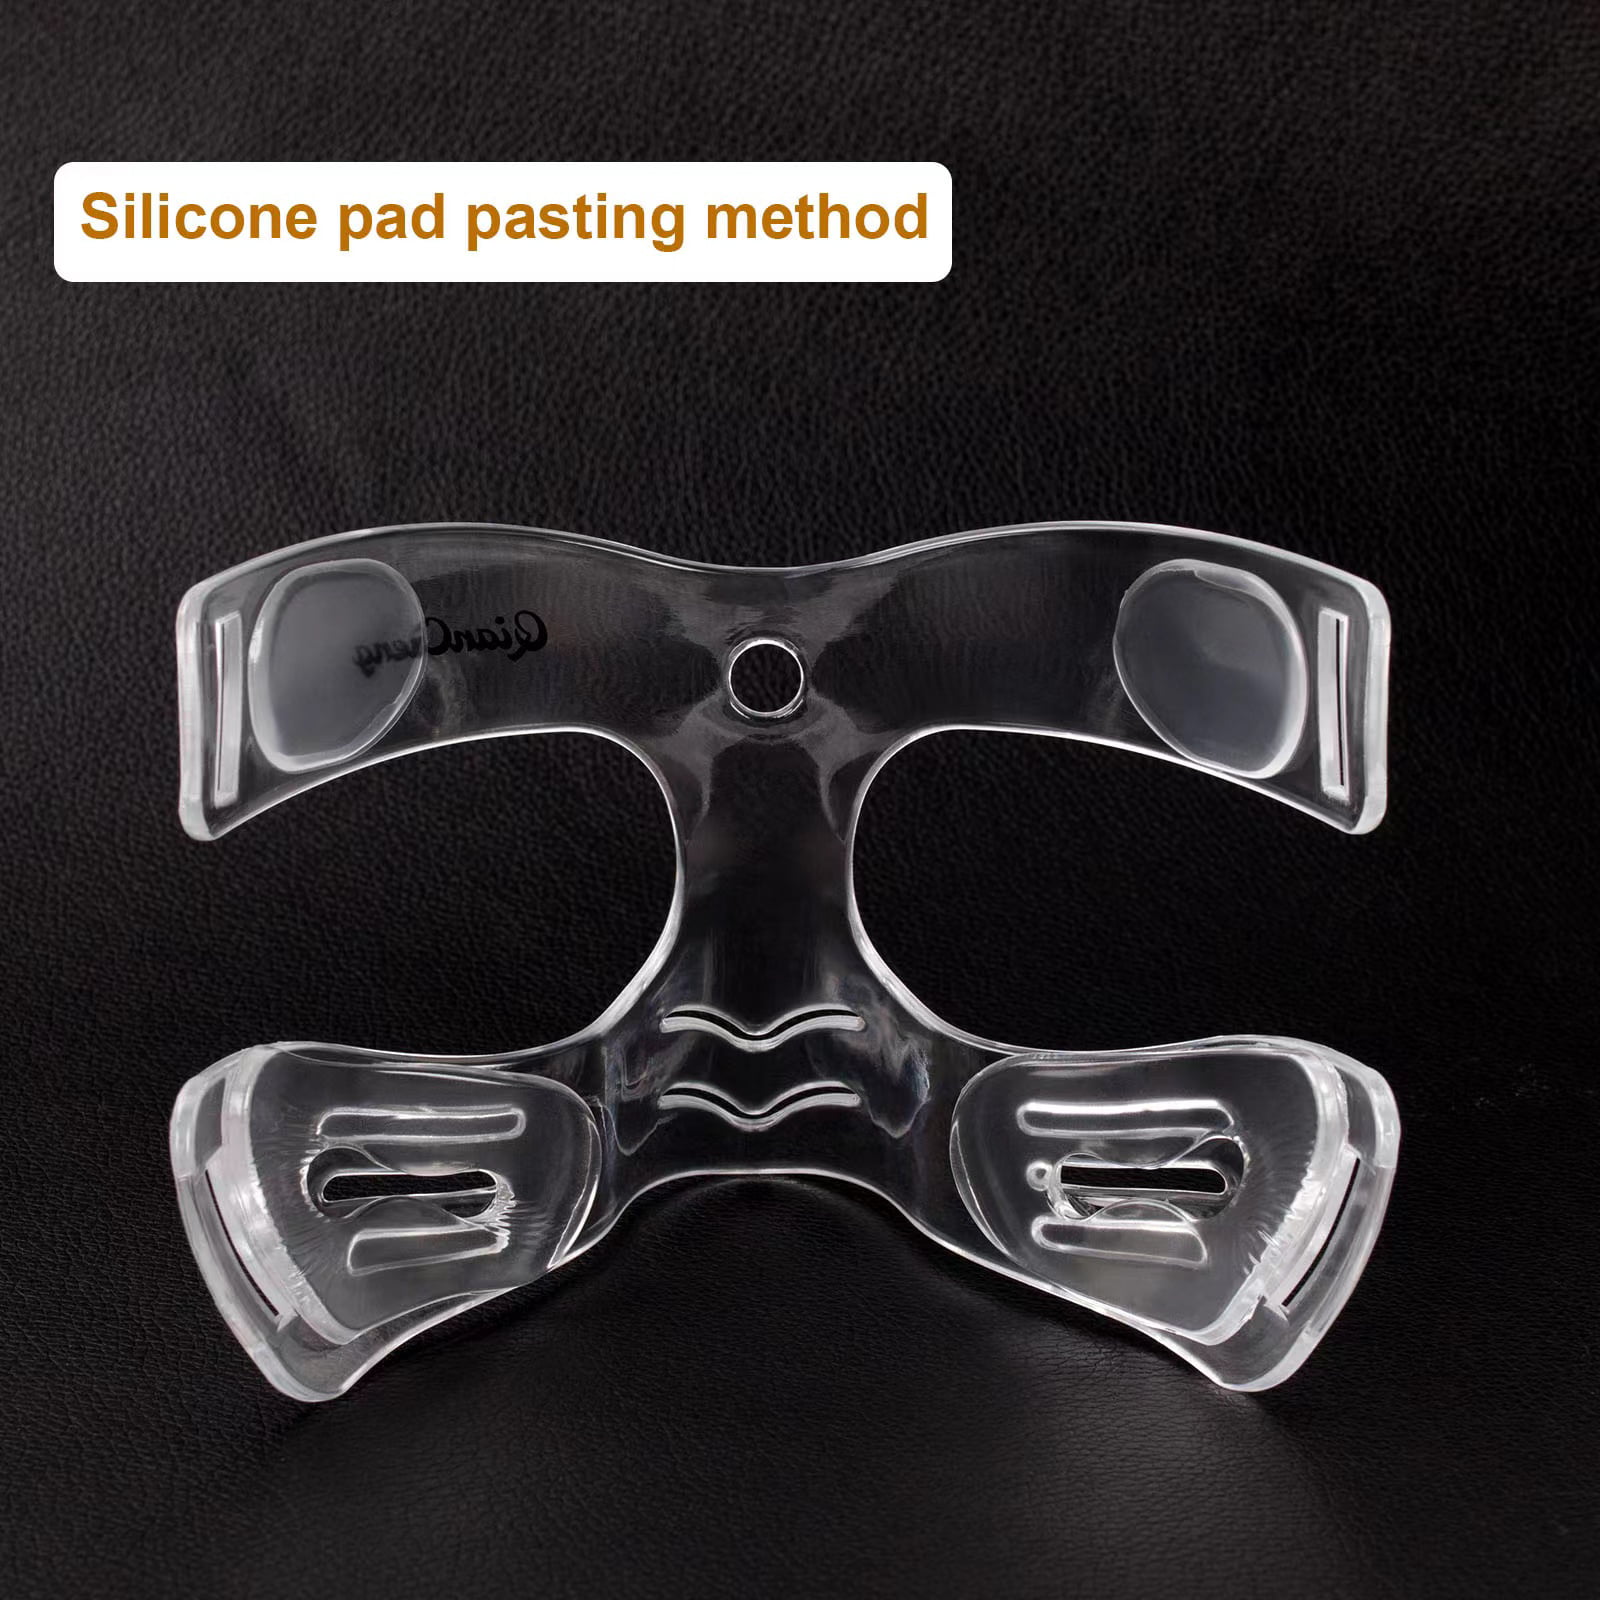 Qiancheng Nose Guard Face Shield Protective Face Mask L5 Medium Size with Padding for Women and Teenagers QC-L5-M 